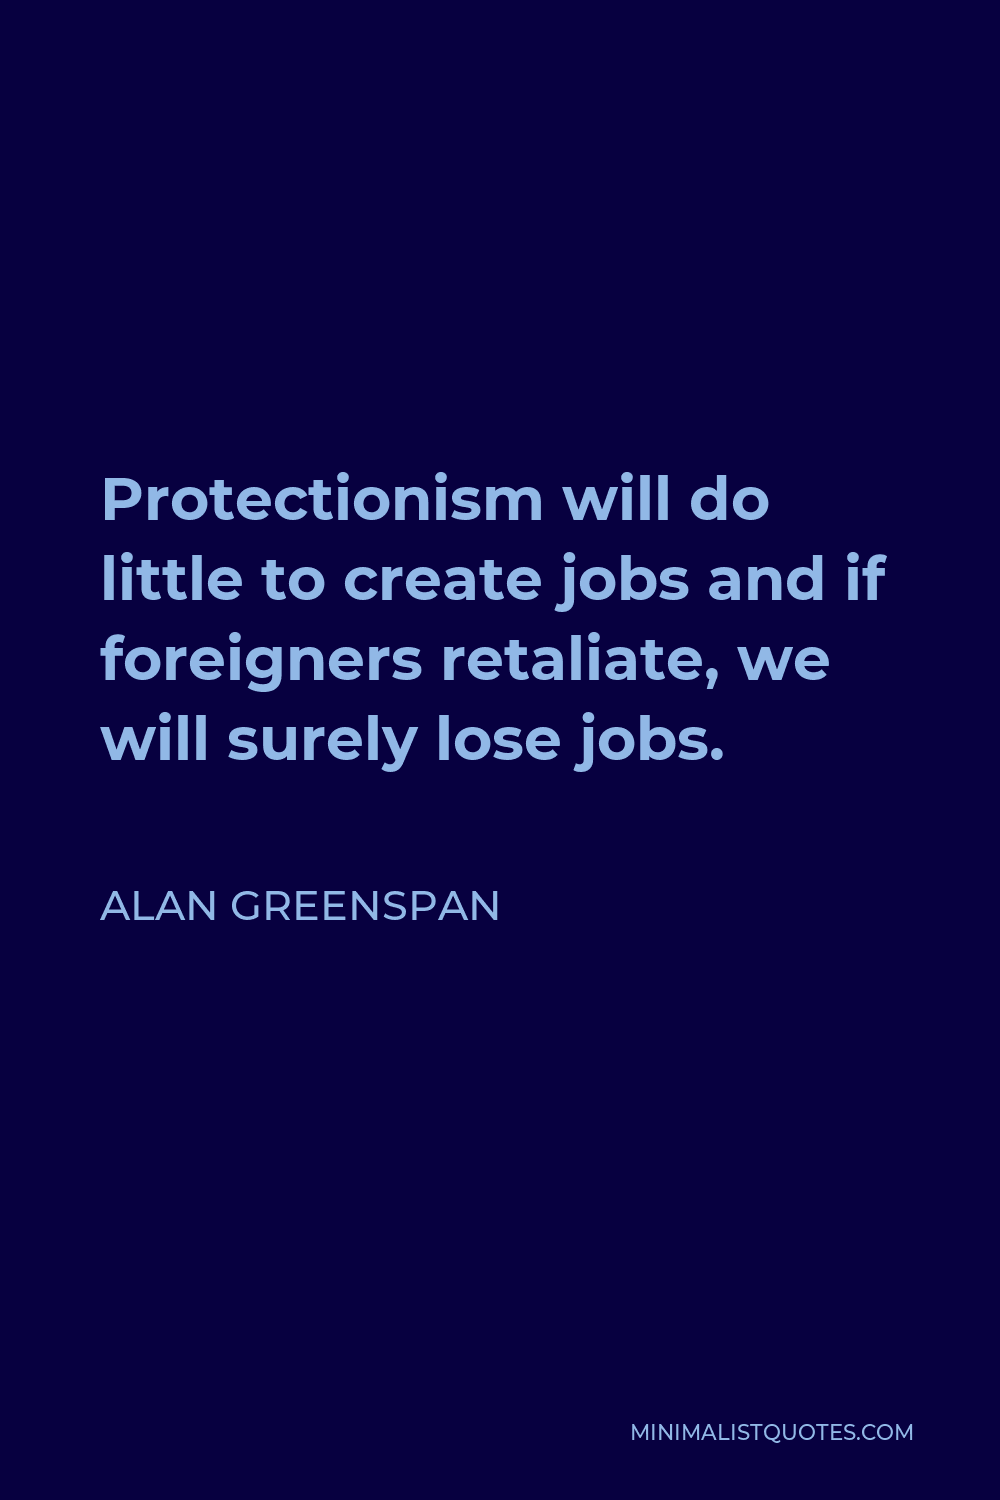 Alan Greenspan Quote - Protectionism will do little to create jobs and if foreigners retaliate, we will surely lose jobs.